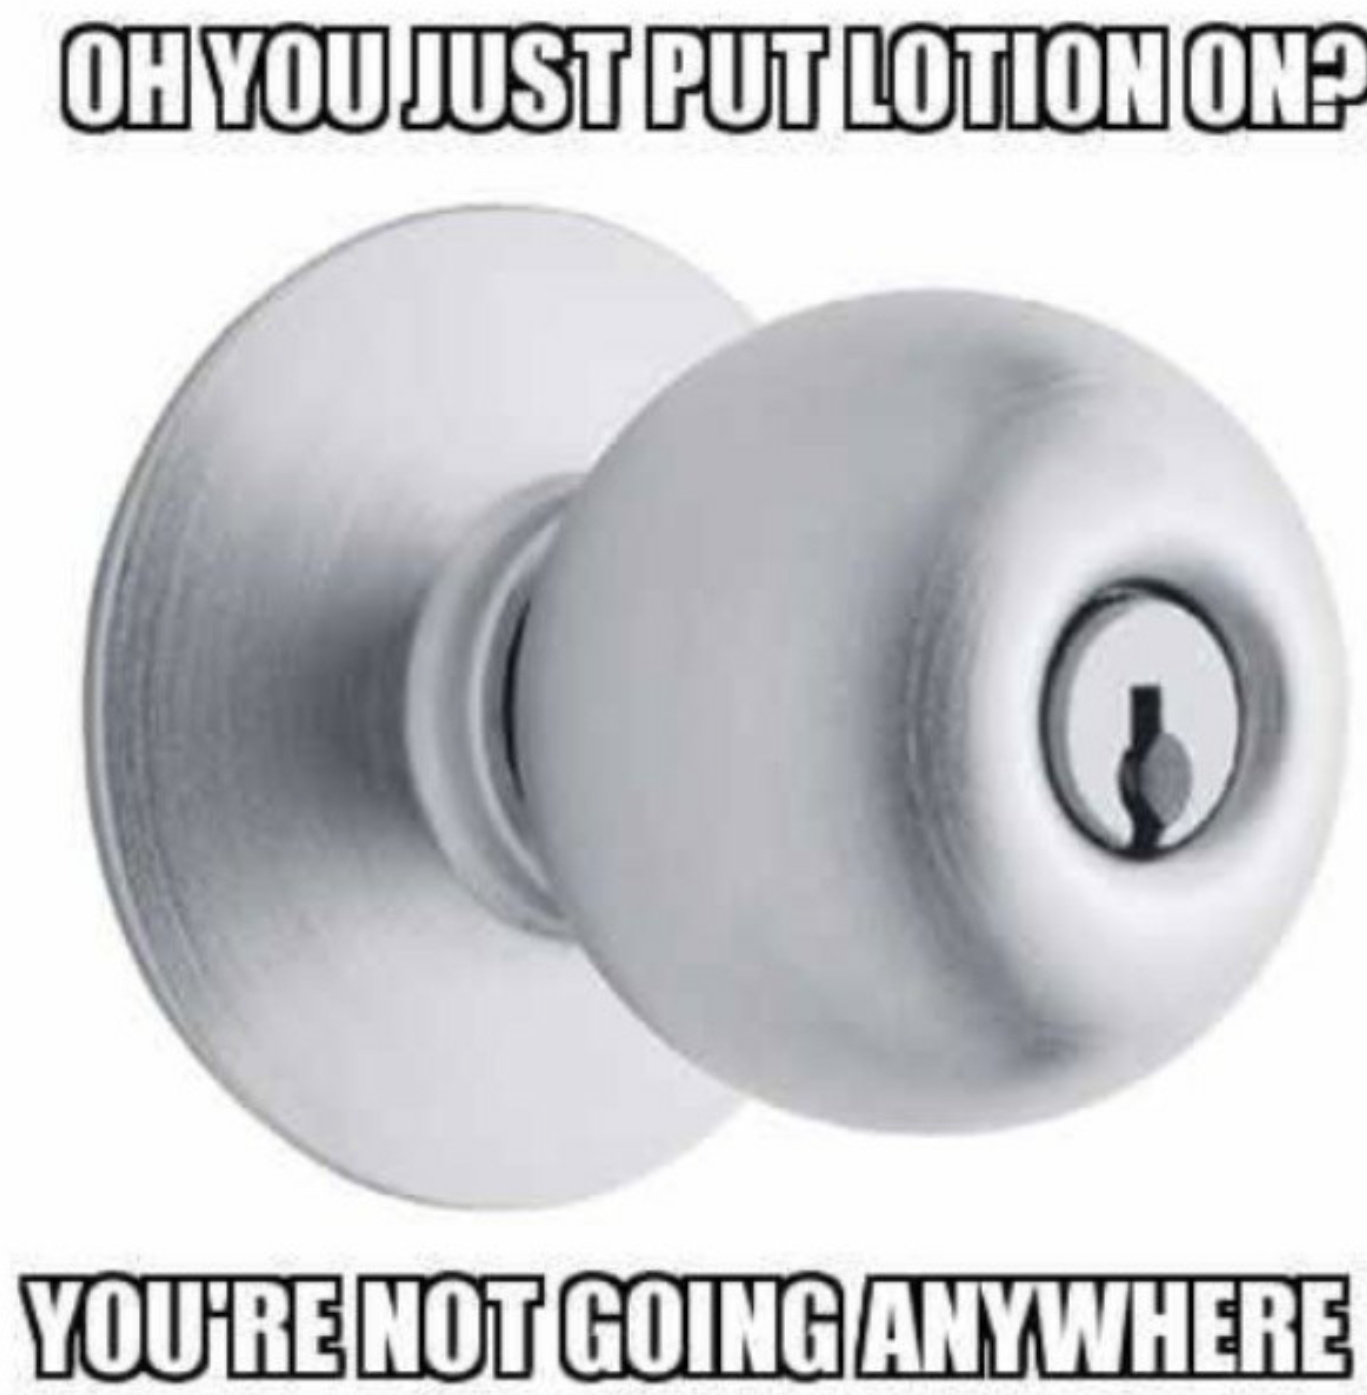 Lotion, if ya know what I mean - meme